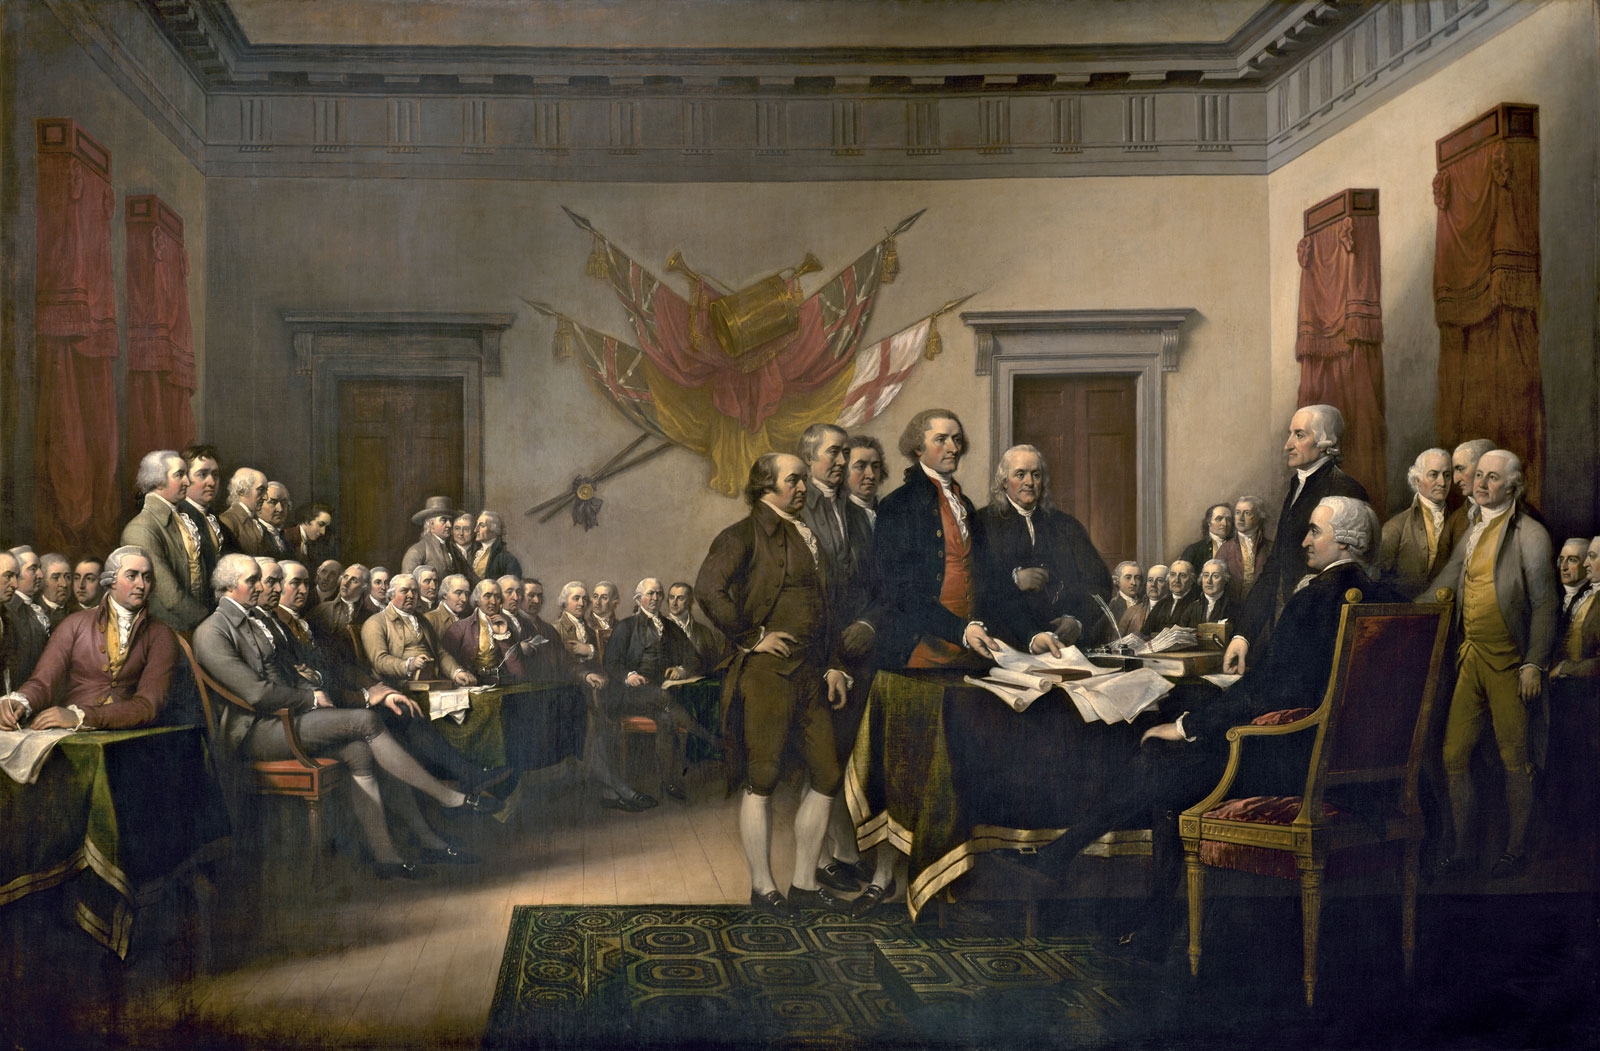 U.S Independence Day (July 4): History, Meaning and Celebrations